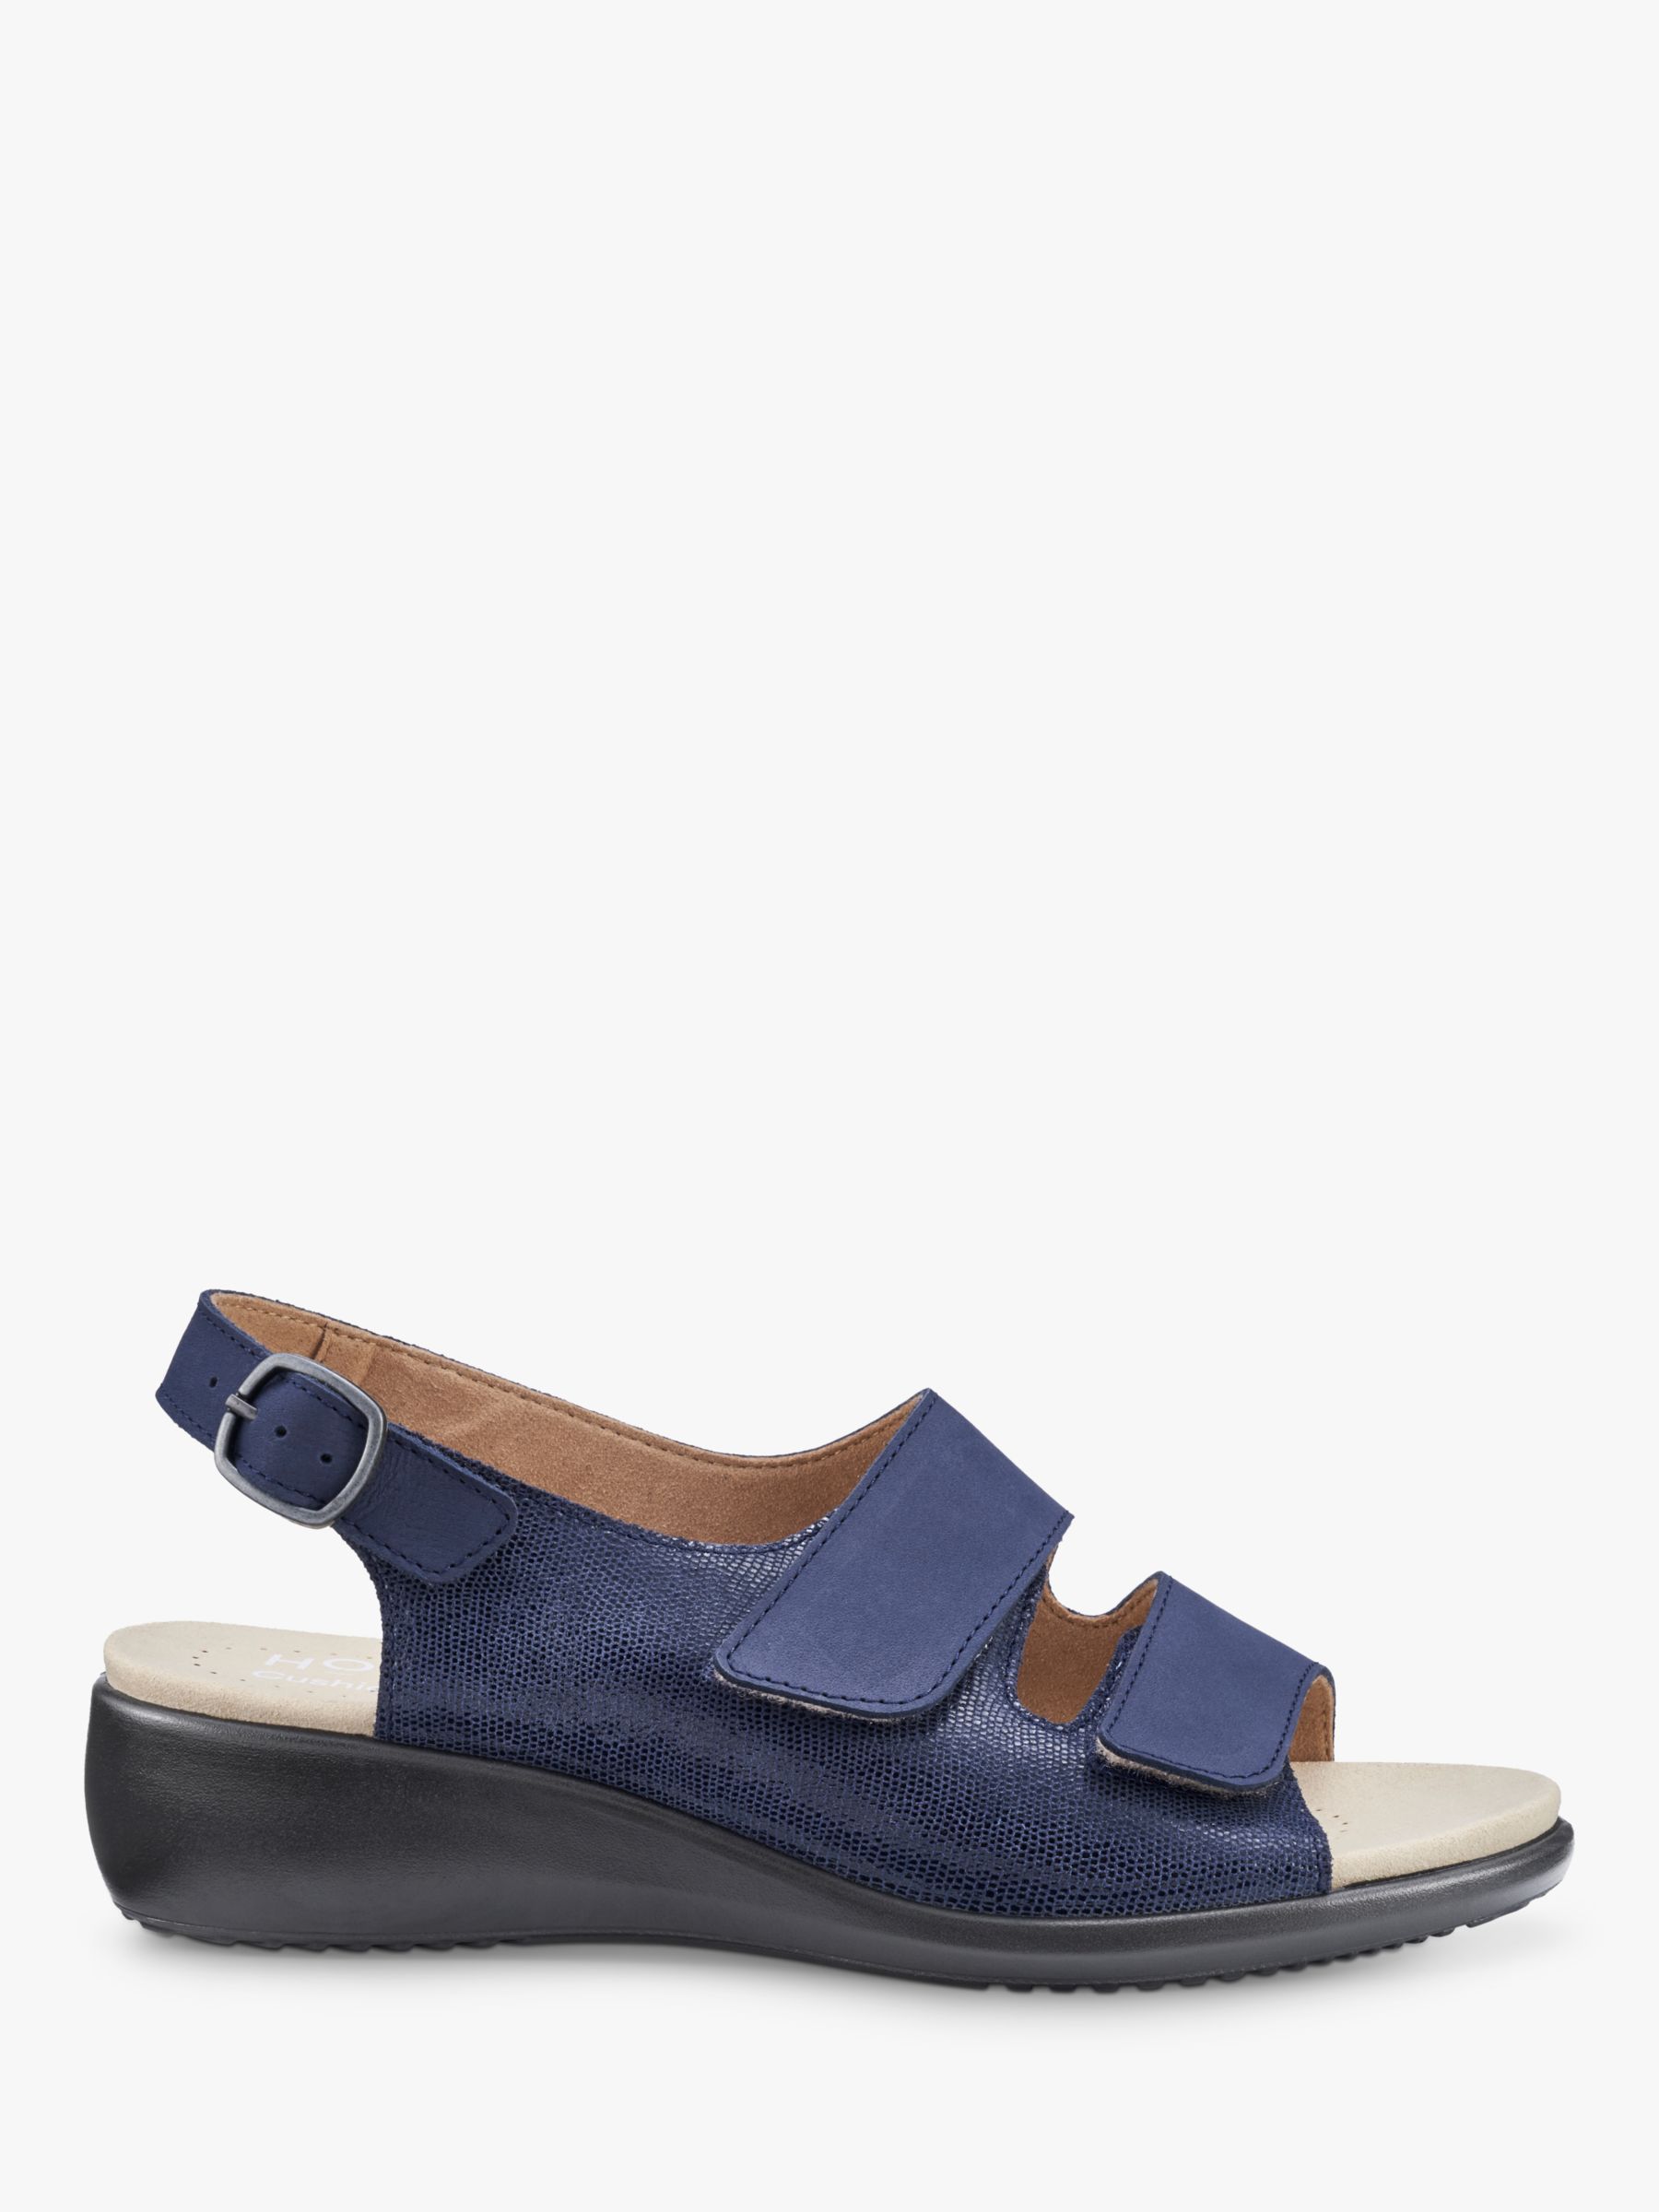 Buy Hotter Easy II Wide Fit Faux Lizard Leather Low Wedge Sandals, Denim Navy Online at johnlewis.com